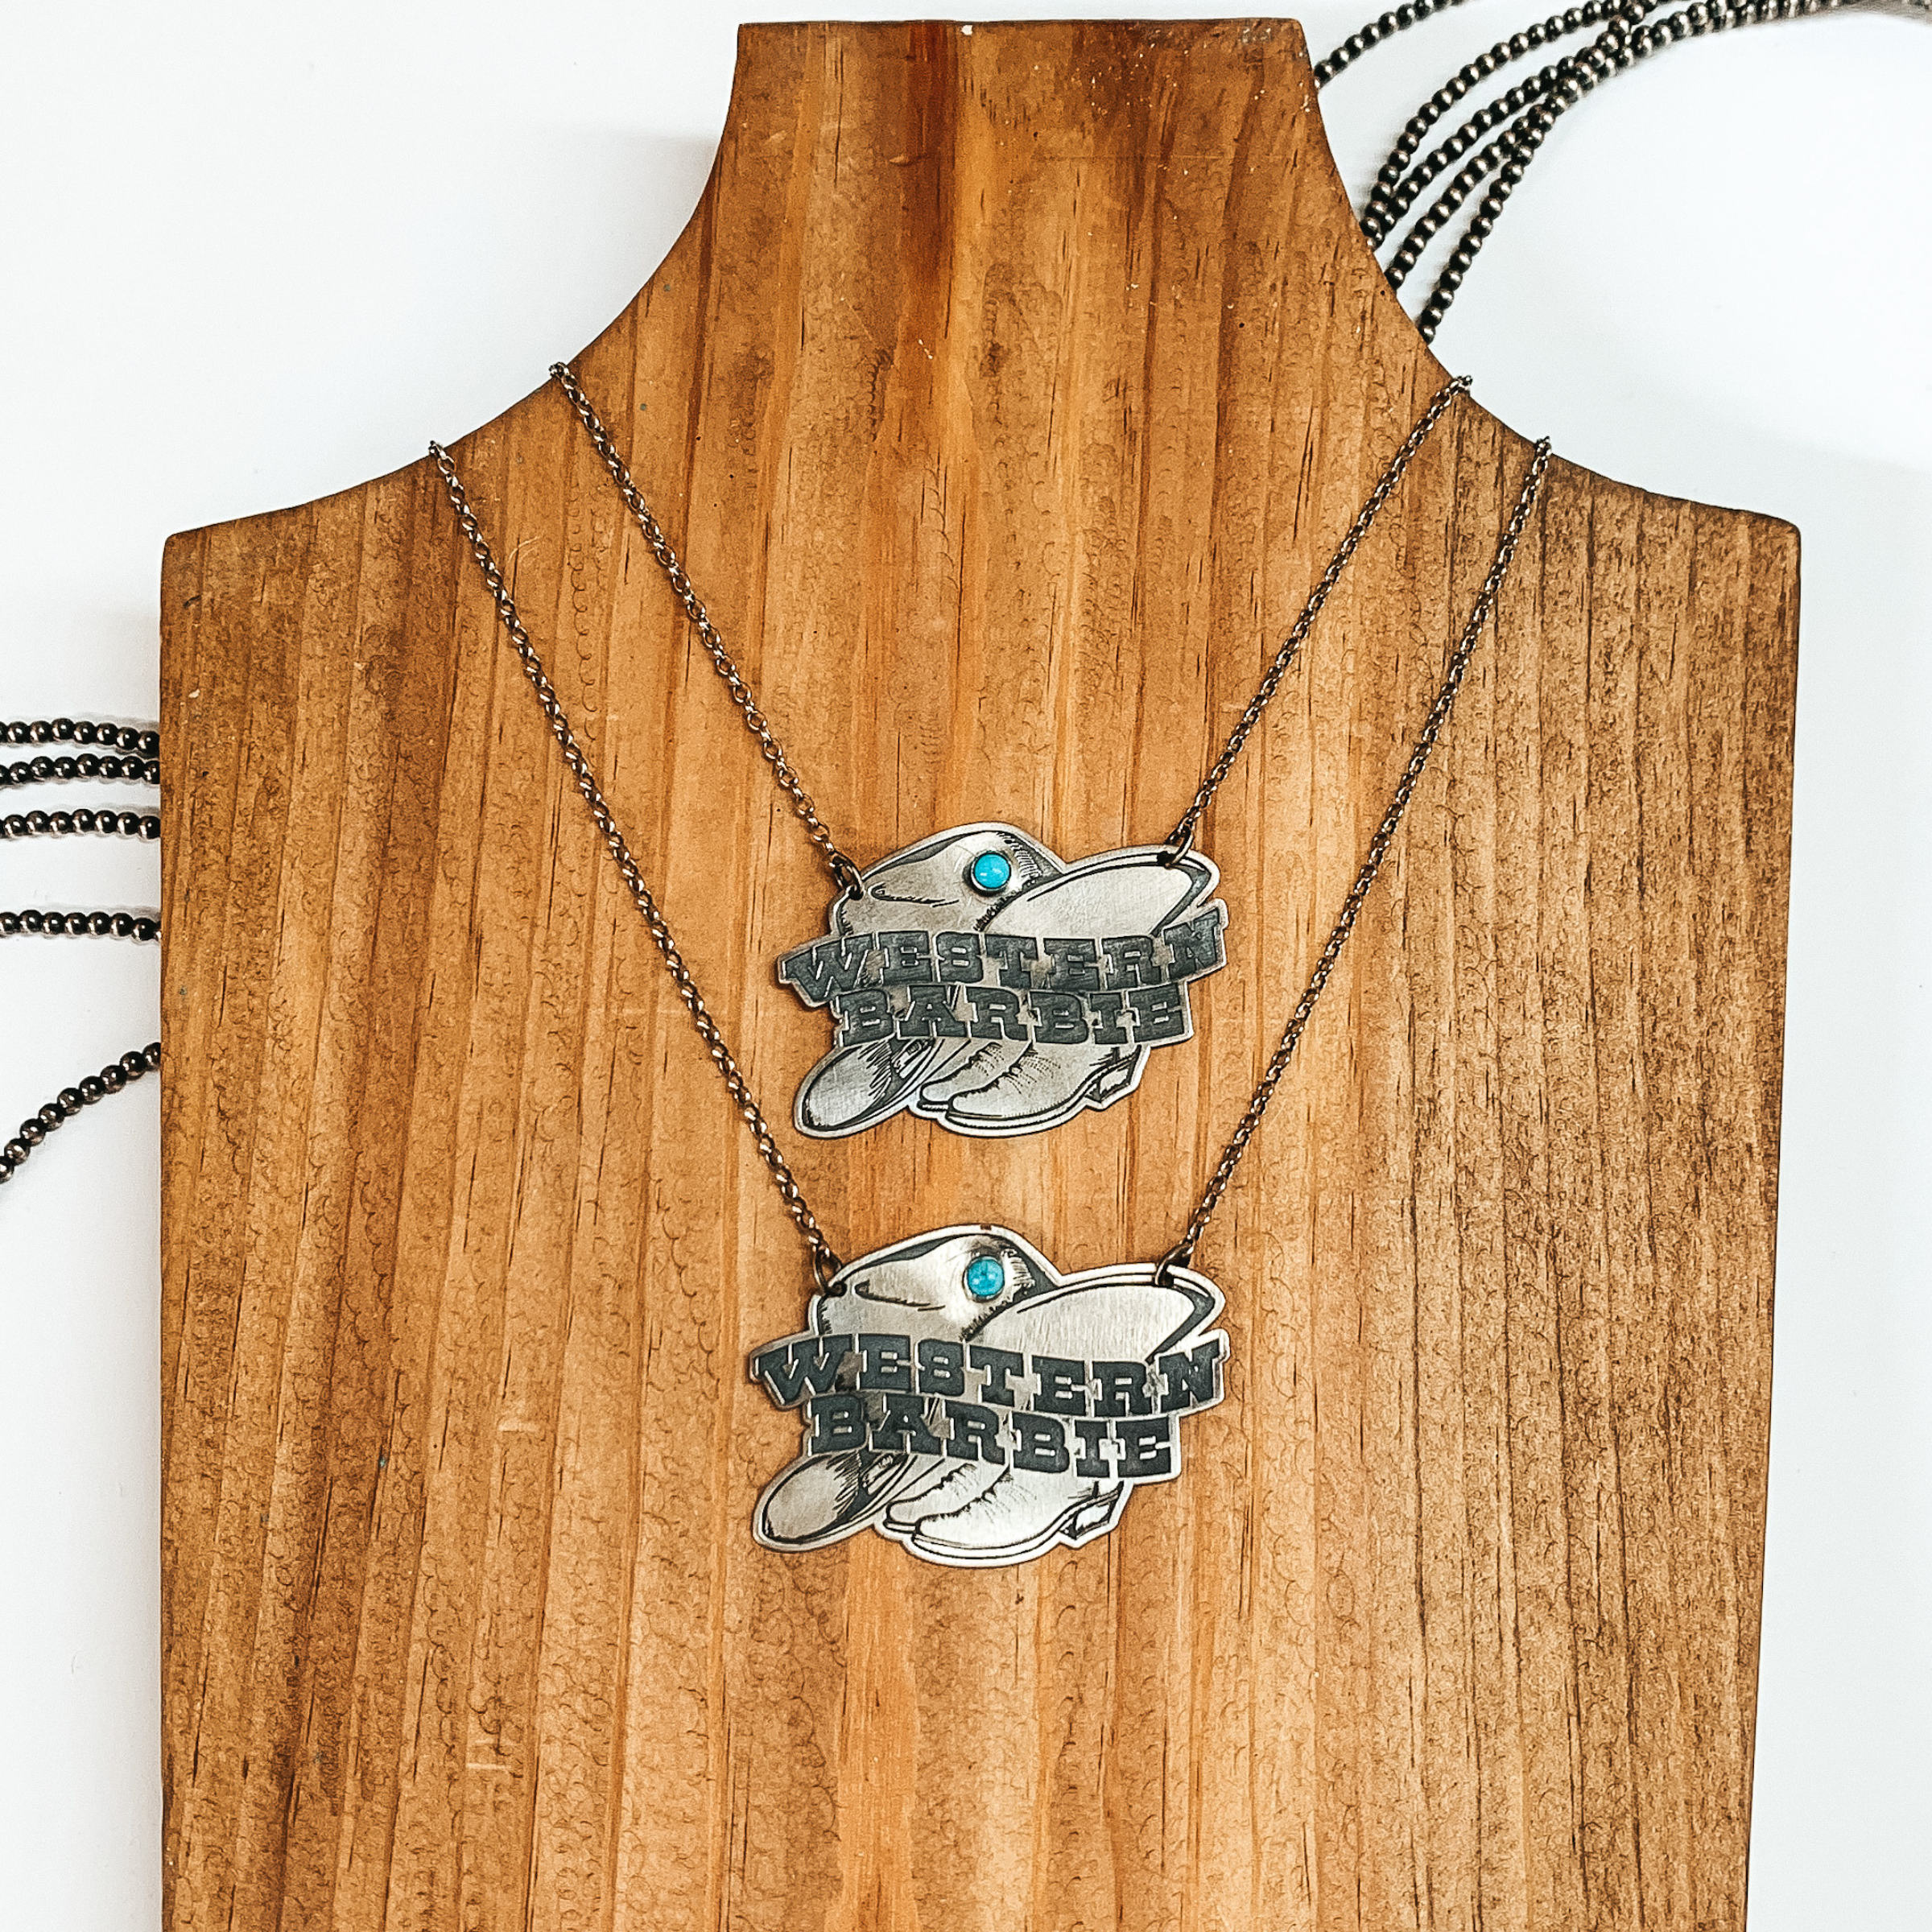 Silver chain necklace with a silver pendant in the shape of a hat and boots and small turquoise stone. The silver pendant has the words "WESTERN BARBIE". This necklace is pictured on a wood block on a white background. 